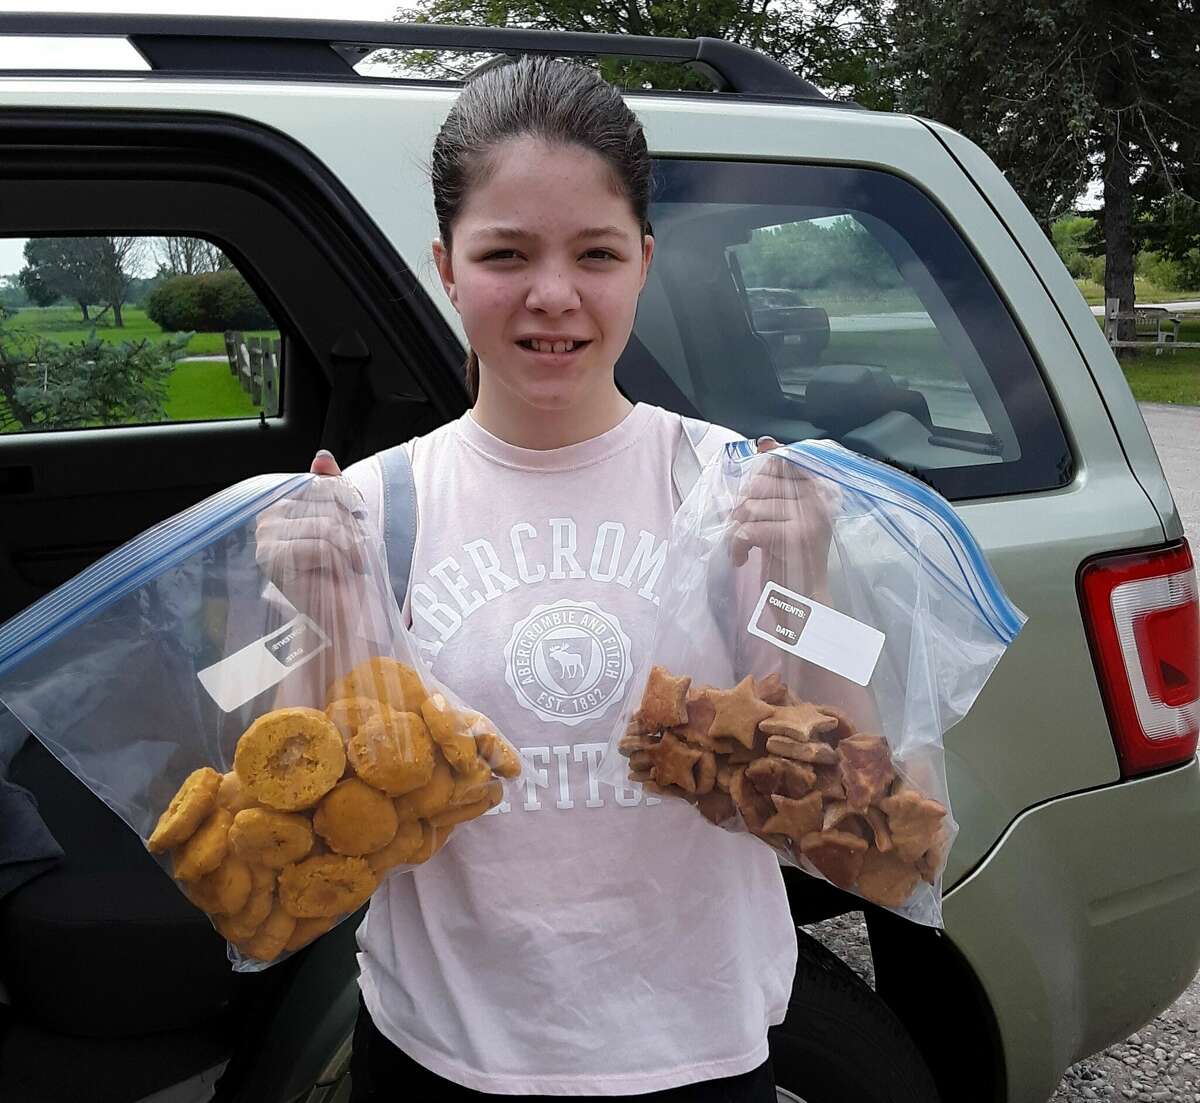 June Mushfield baked homemade dog treats for the Humane Society animal shelter as part of her Girl Scout Silver Award project.